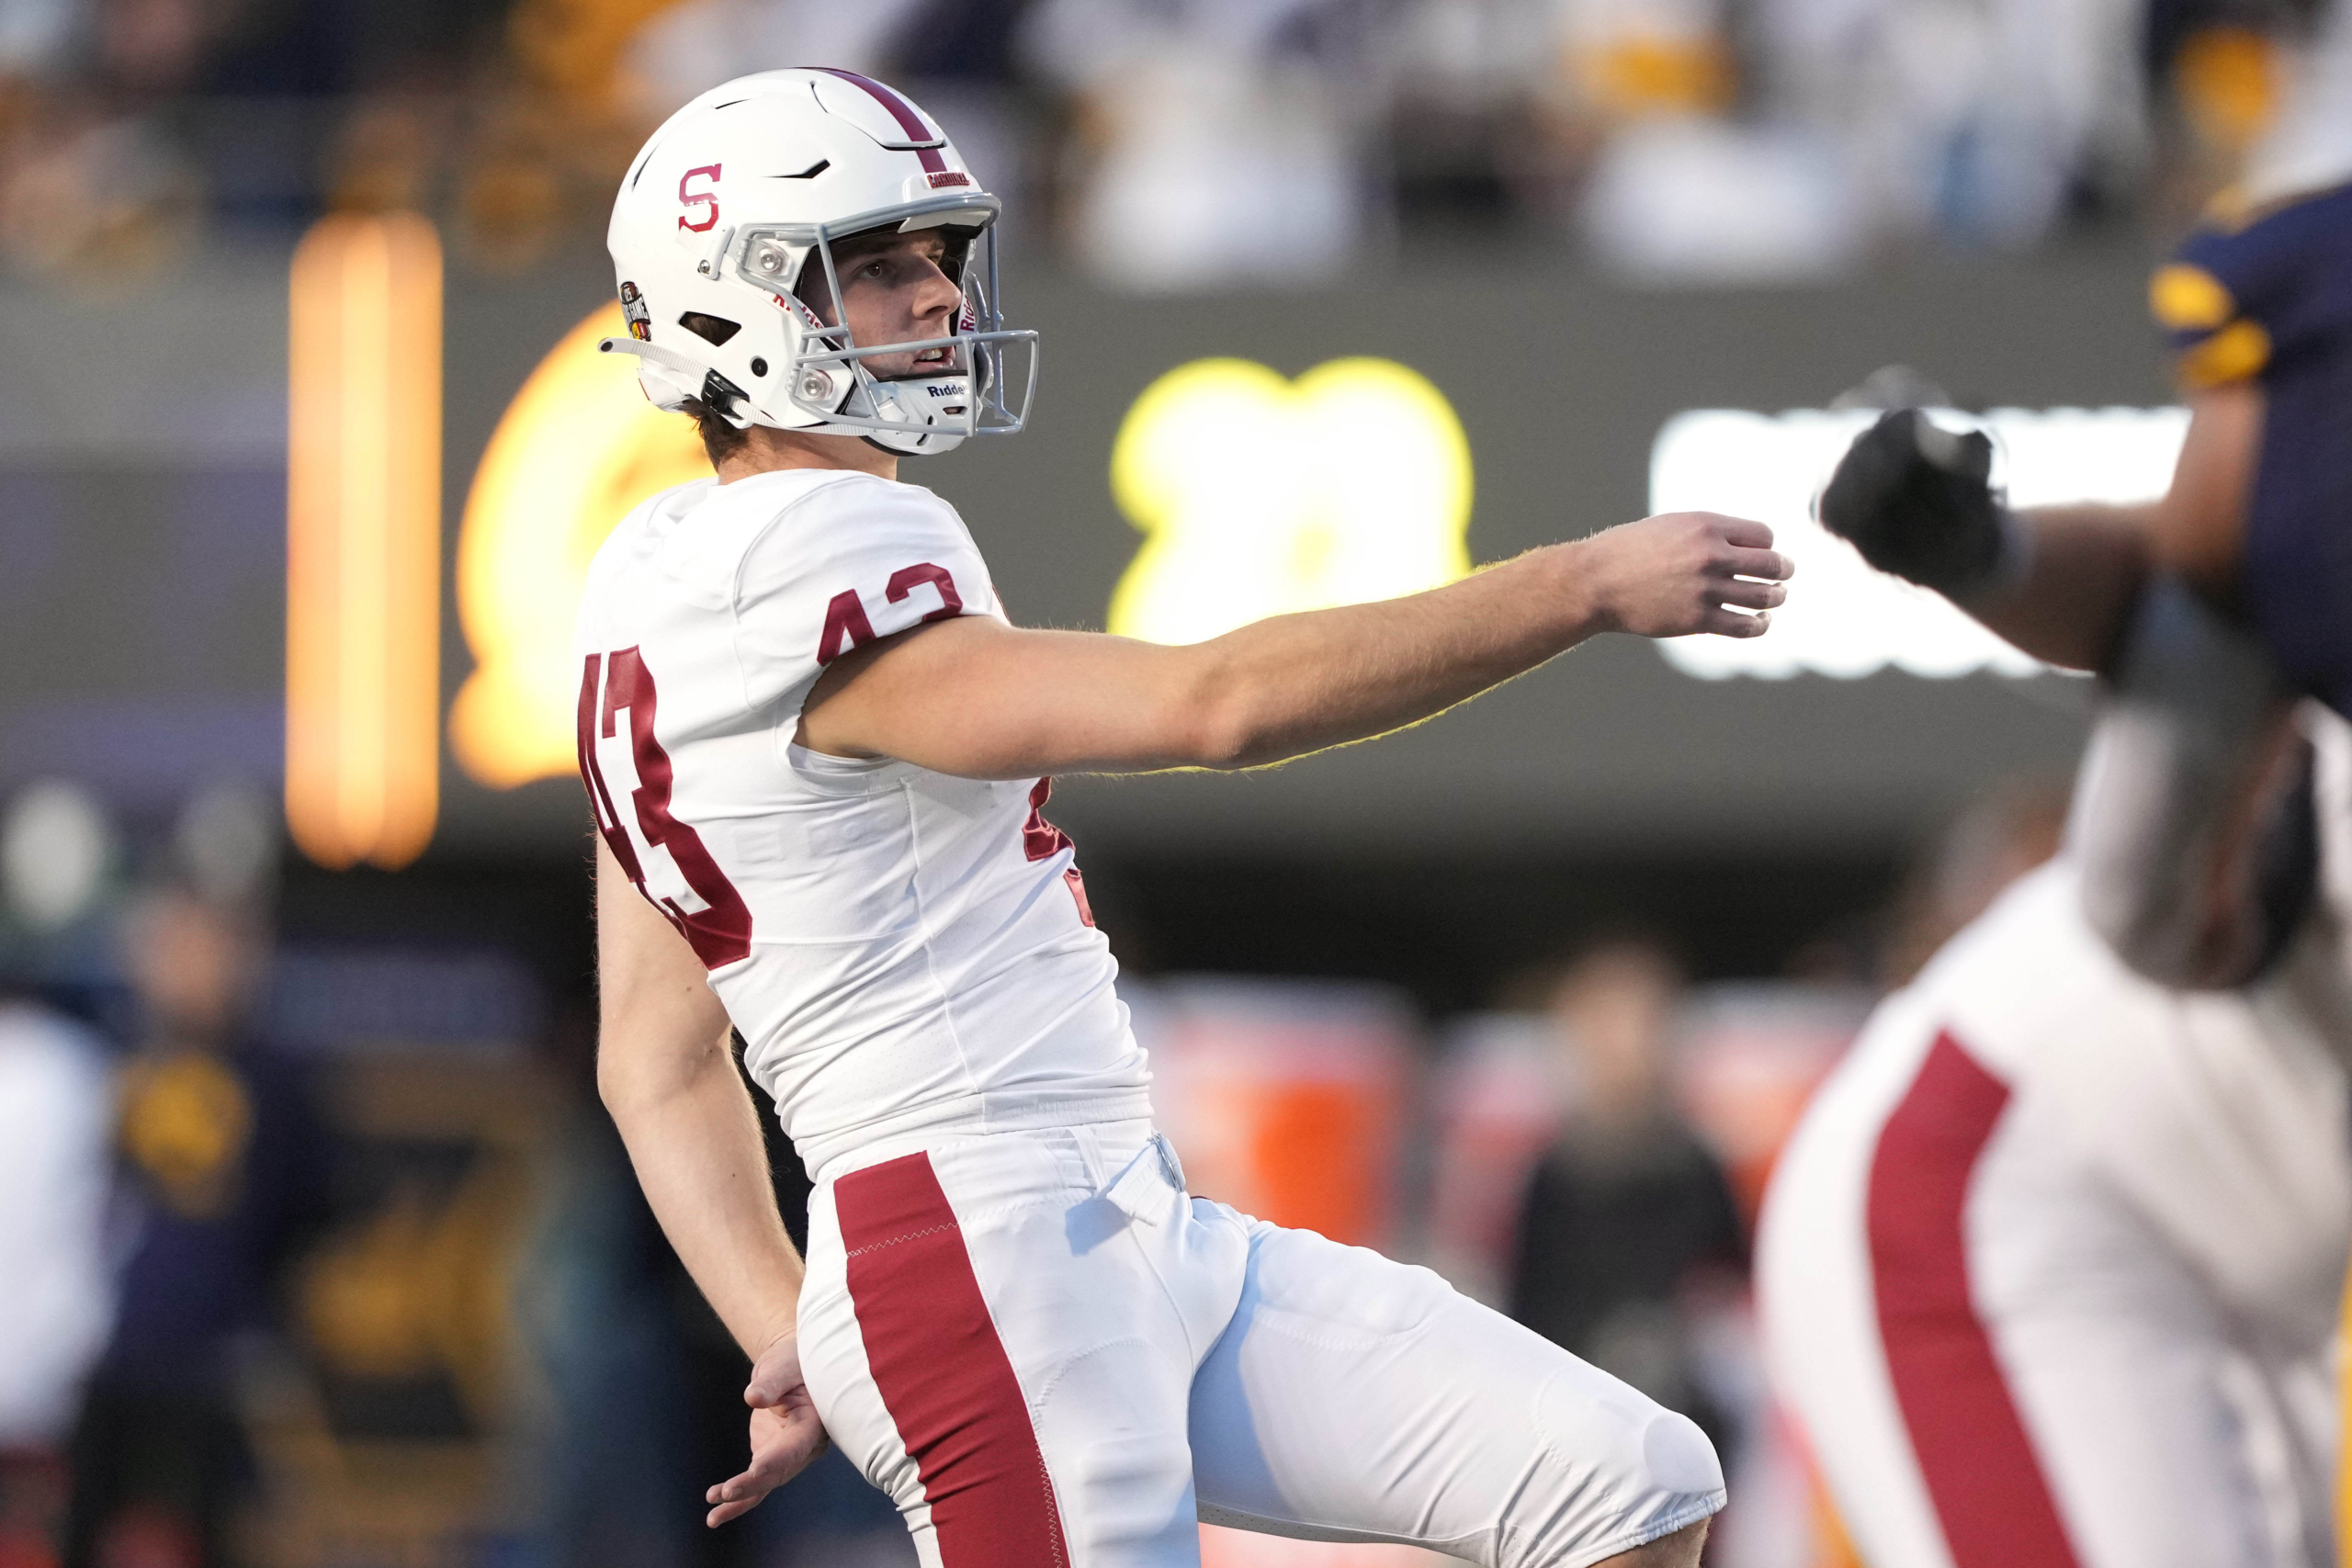 Longest field goal in college football history: From 2022 to Ove Johansson’s NCAA record